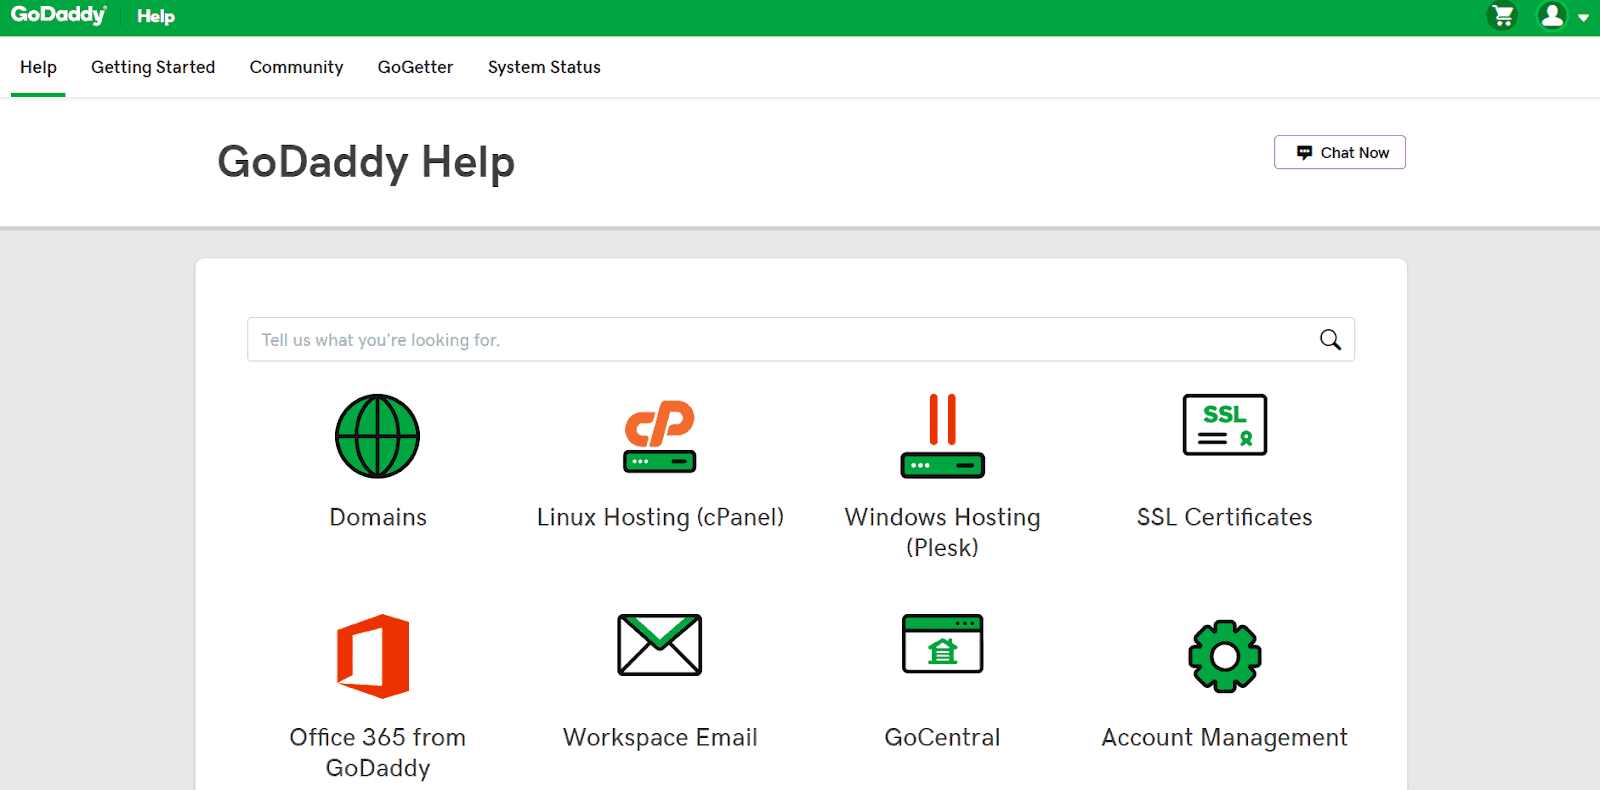 Everything You Need to Know About GoDaddy Hosting: Our Review - Help page